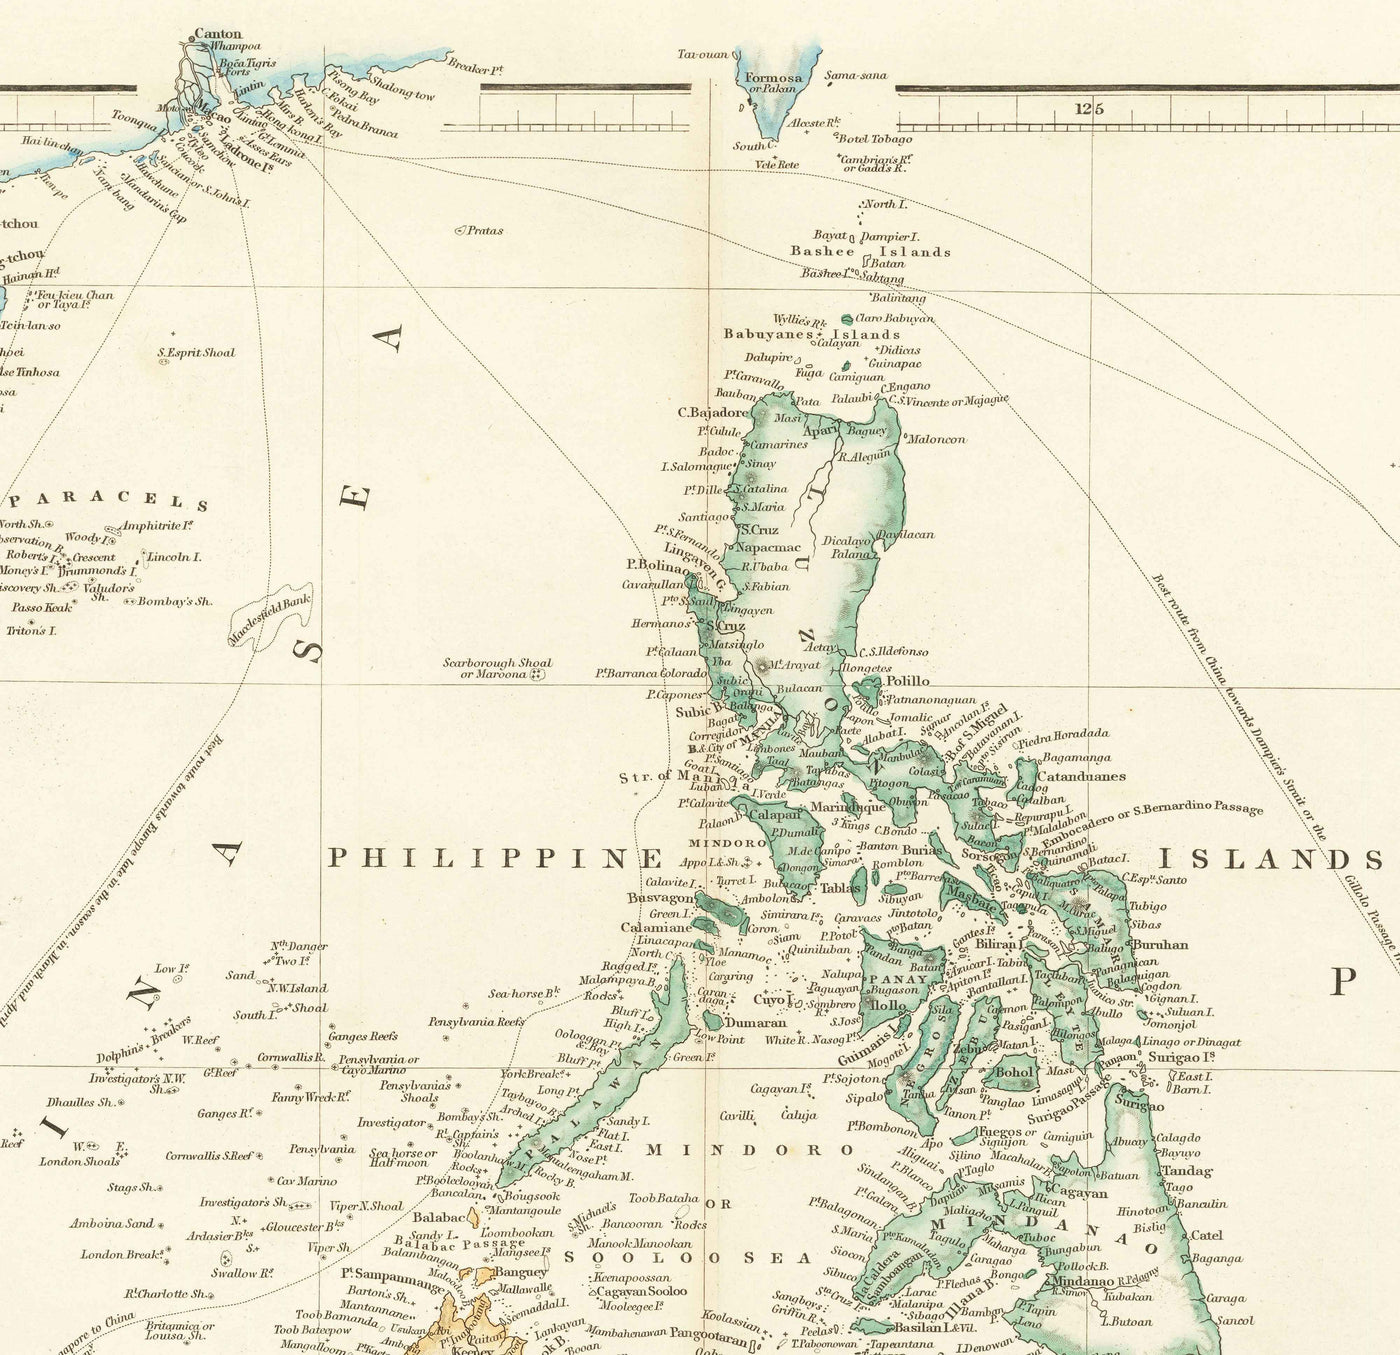 Old Map of Malay Archipelago & East Indies by Arrowsmith, 1859 - Southeast Asia, Philippines, Islands, Straits, Singapore